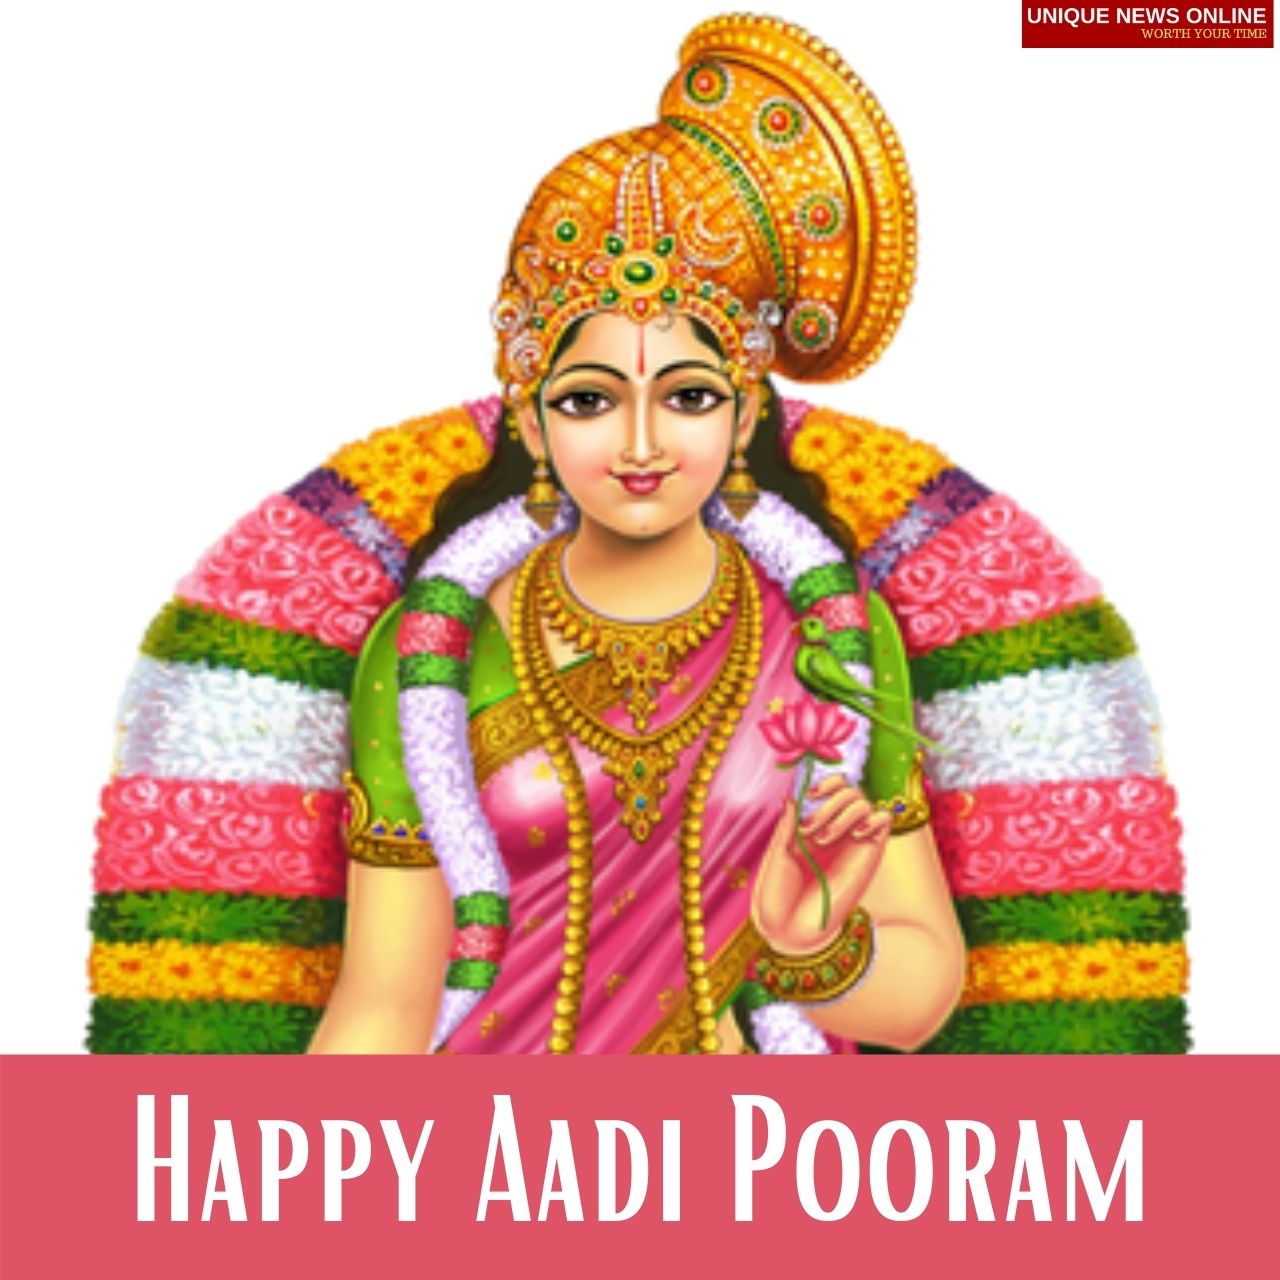 Aadi Pooram 2021 Wishes, Images, Messages, Quotes, Greetings, and Status to Share